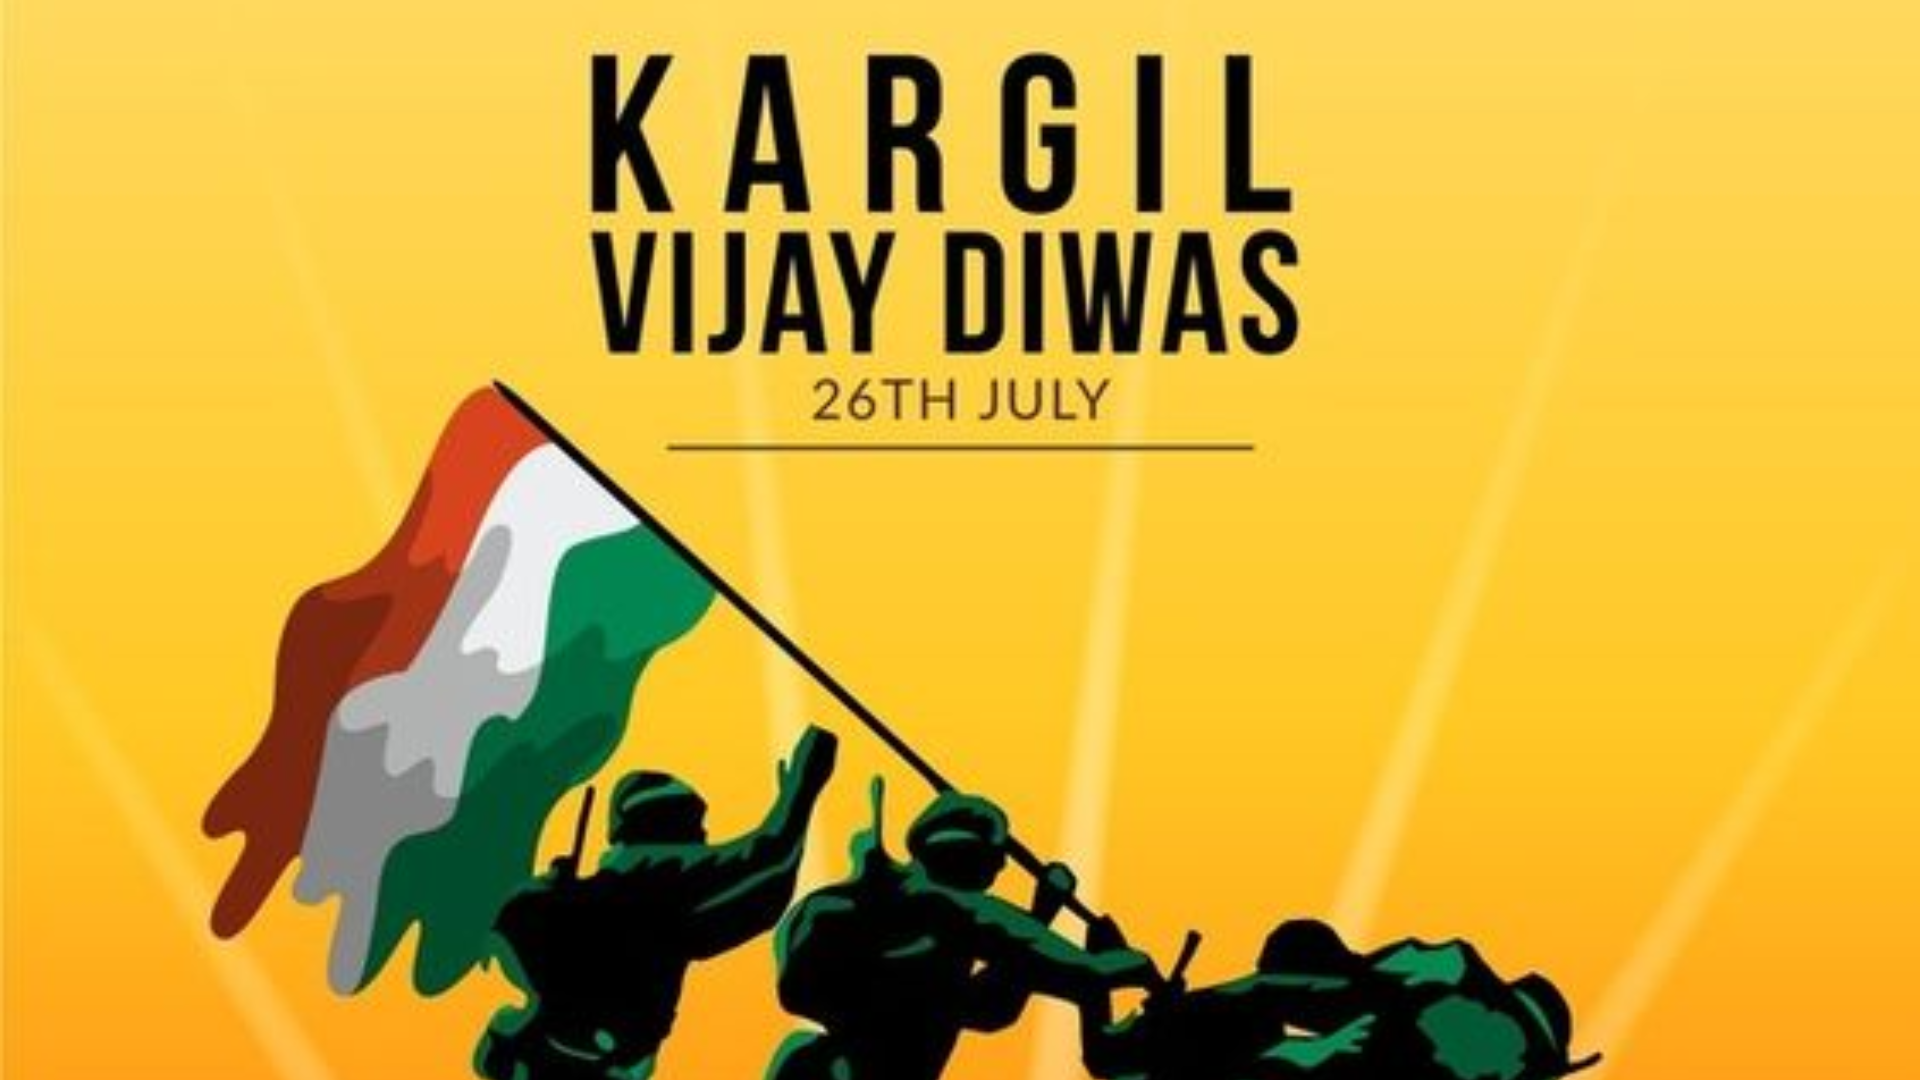 Kargil Vijay Diwas: India Marks The Day with Tributes and New Infrastructure Milestone